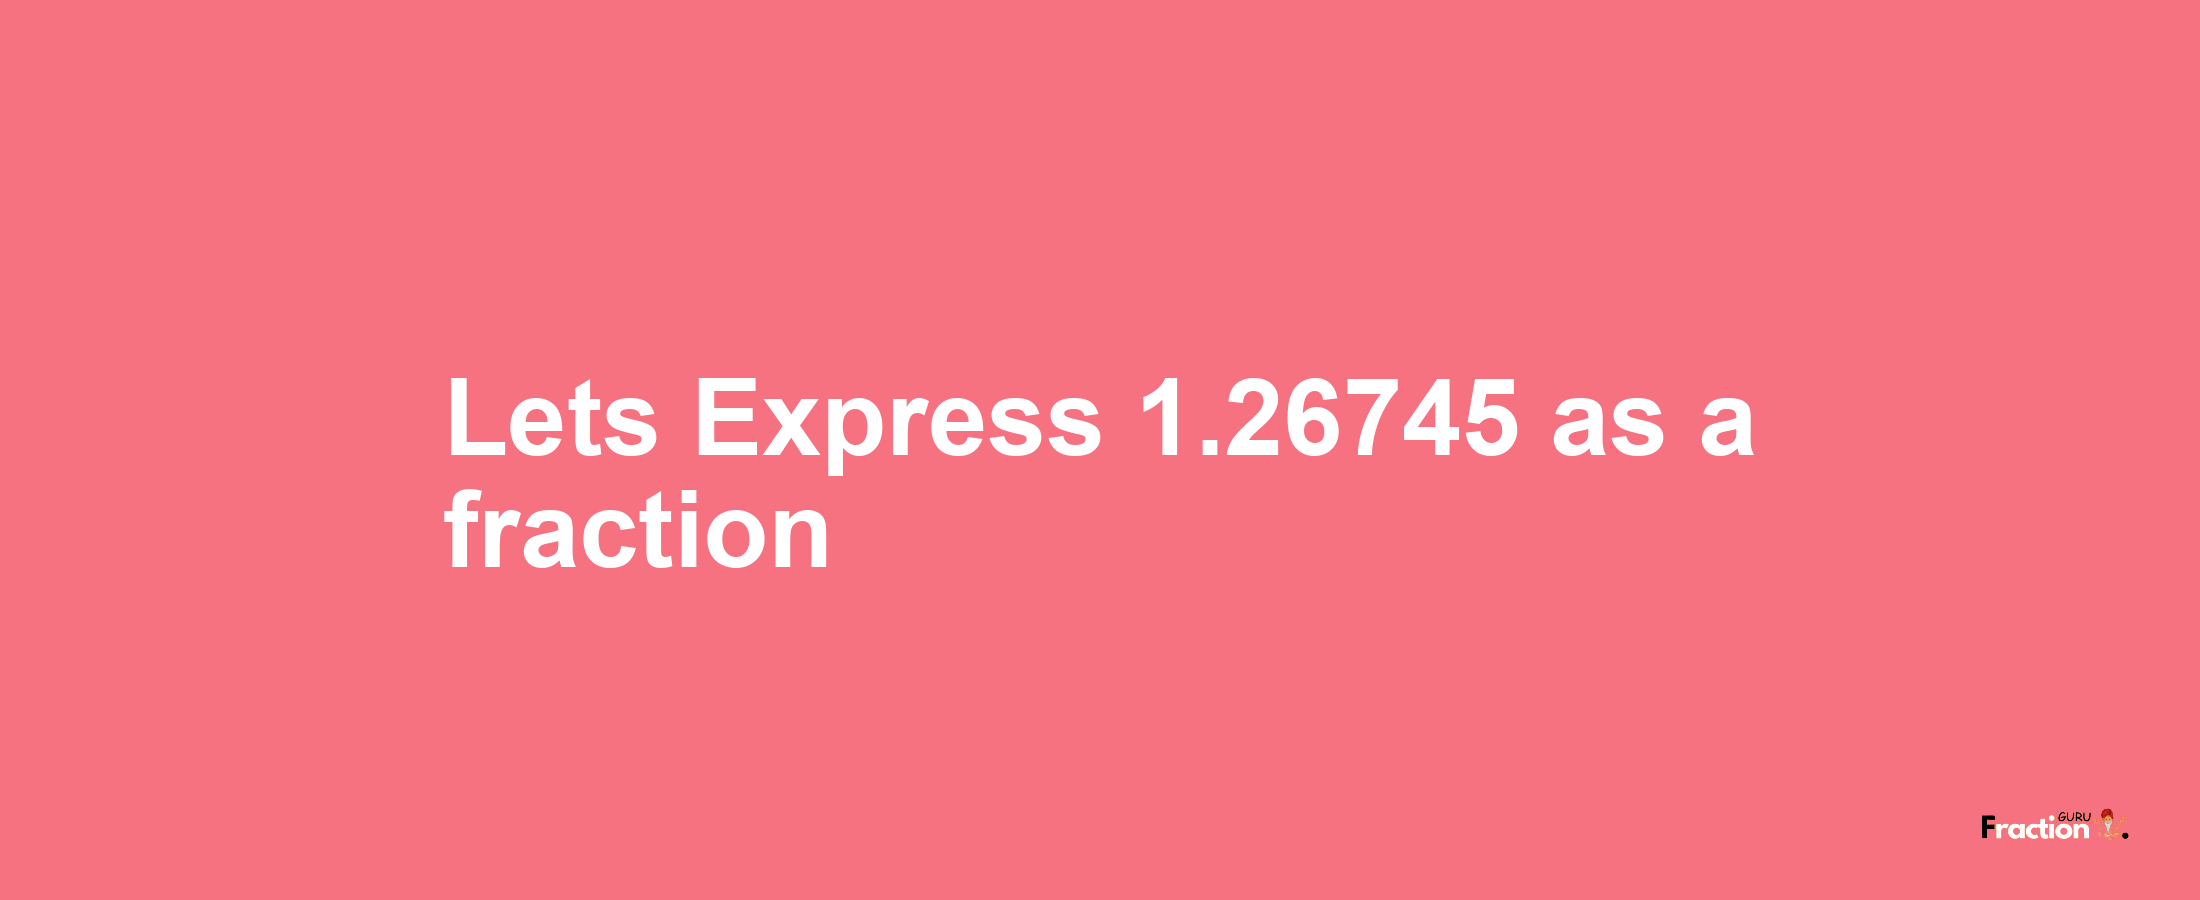 Lets Express 1.26745 as afraction